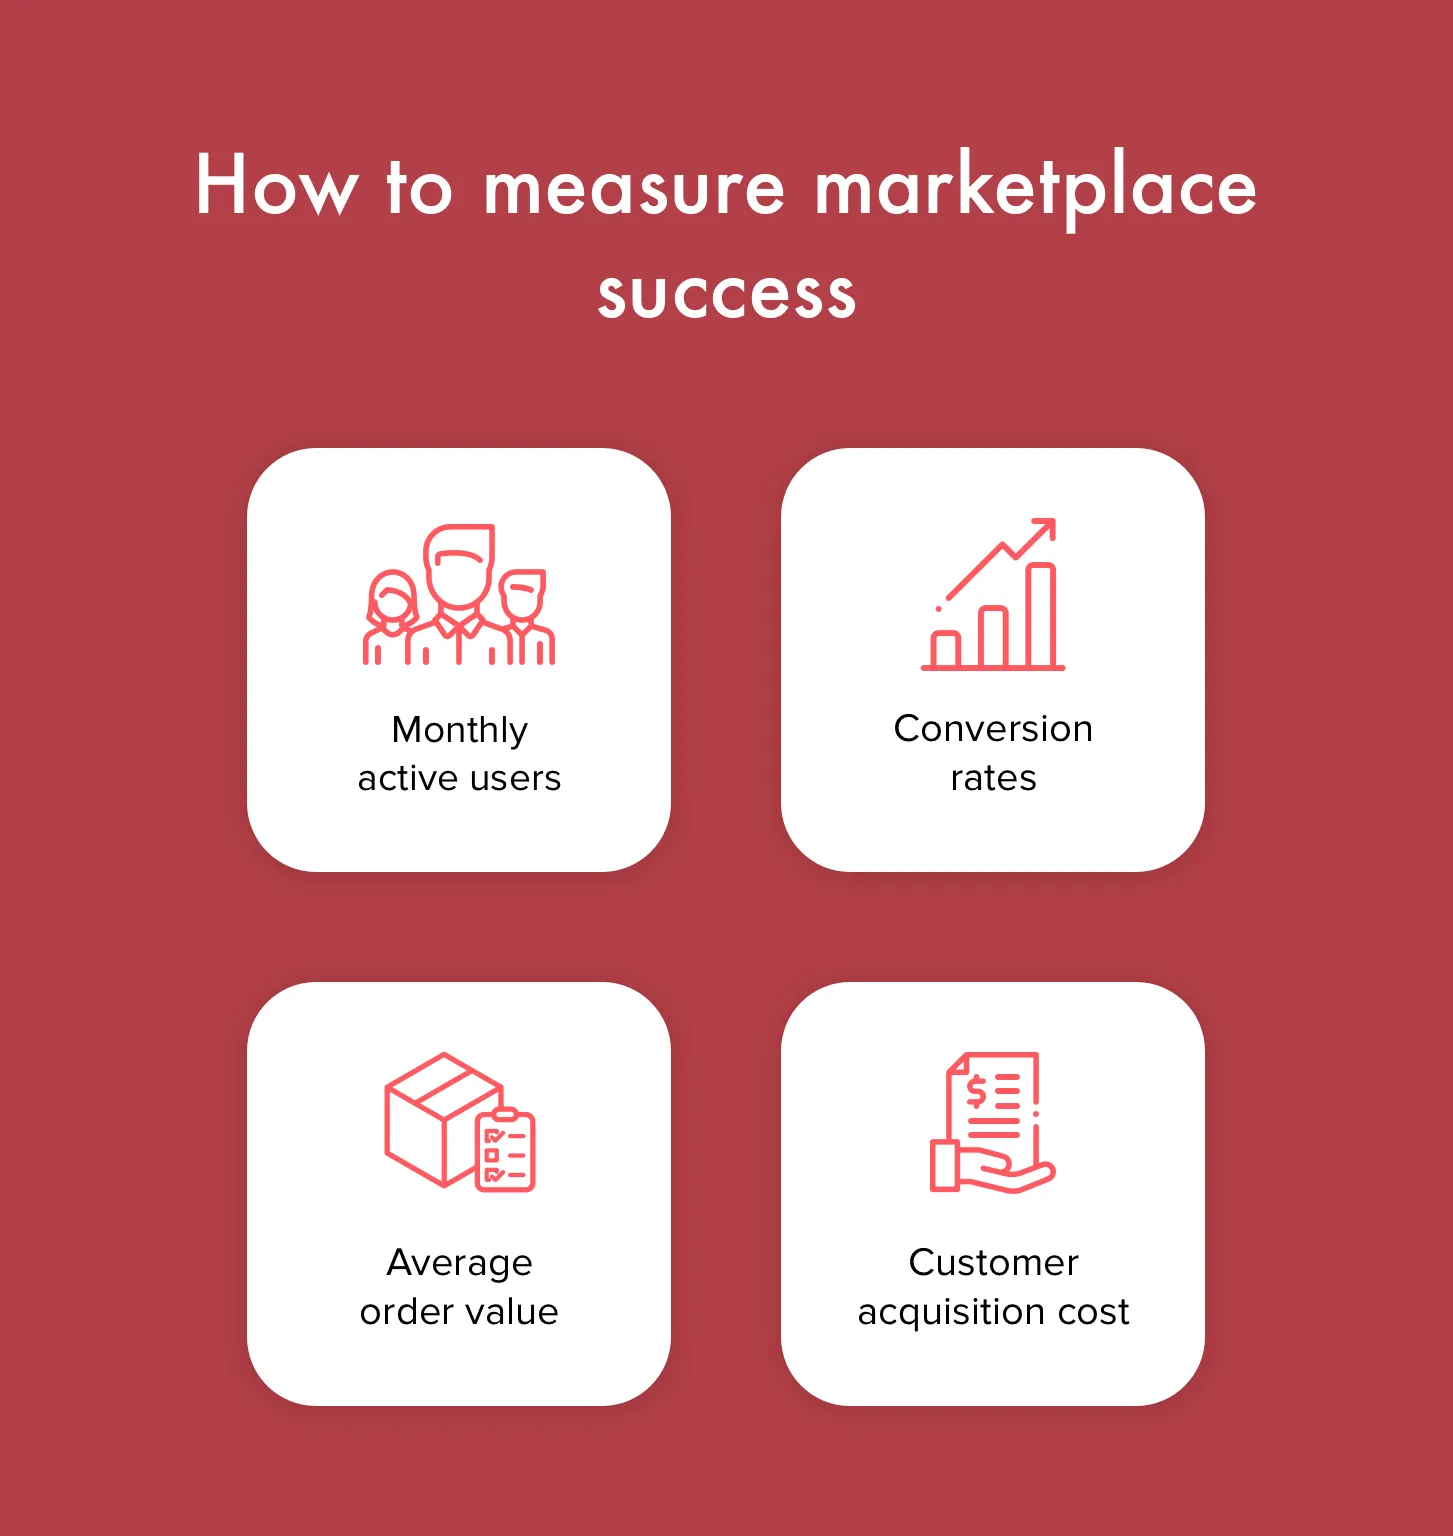 How to measure marketplace success